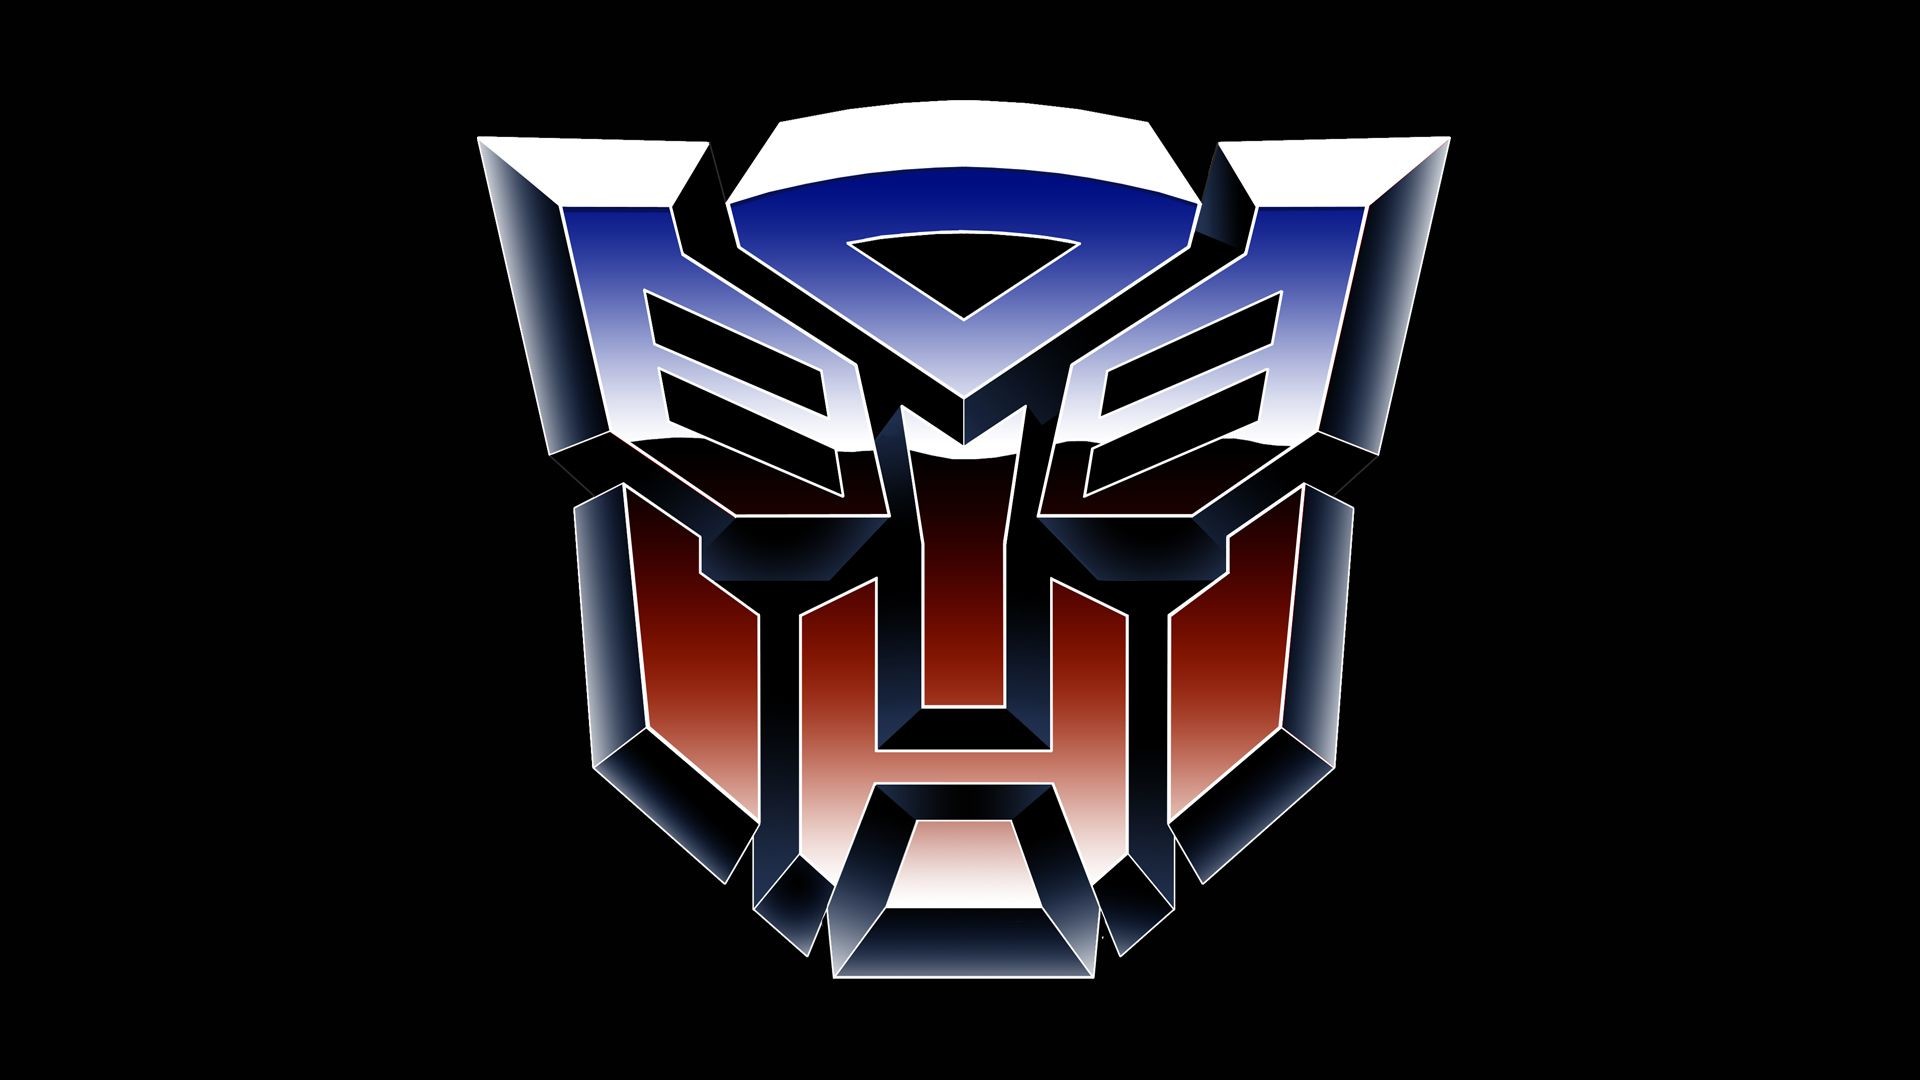 Transformers 4 Autobots Wallpapers HD Wallpapers autobots logo 01 1,9201,080